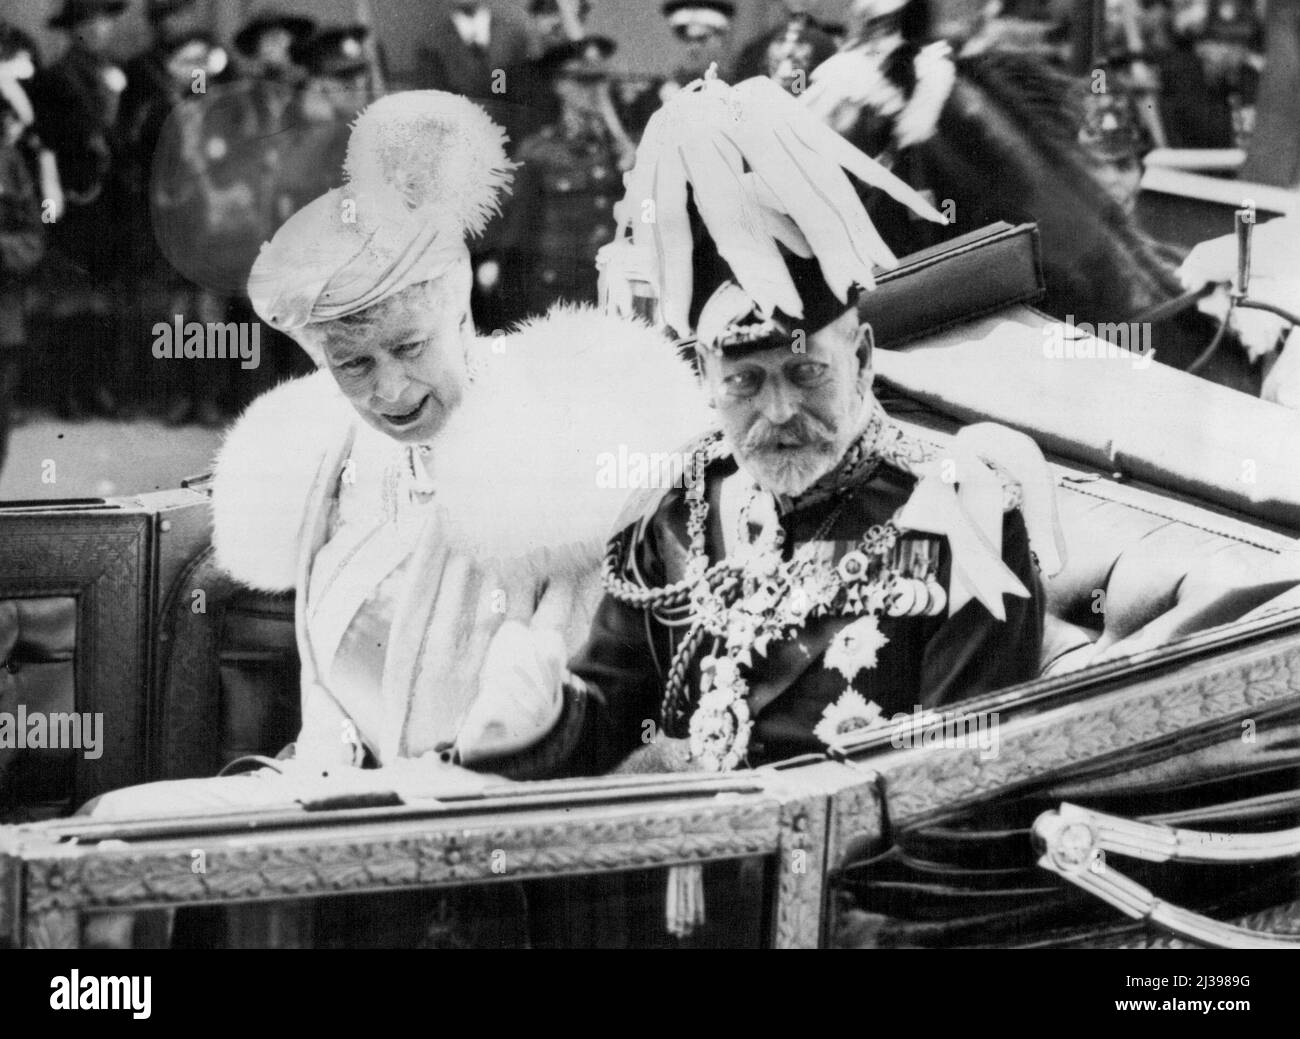 Couple - During the Jubilee celebrations the king and Queen entered the city, ceremony at temple bar. Both acknowledge the cheers of the crowd. June 17, 1935. Stock Photo